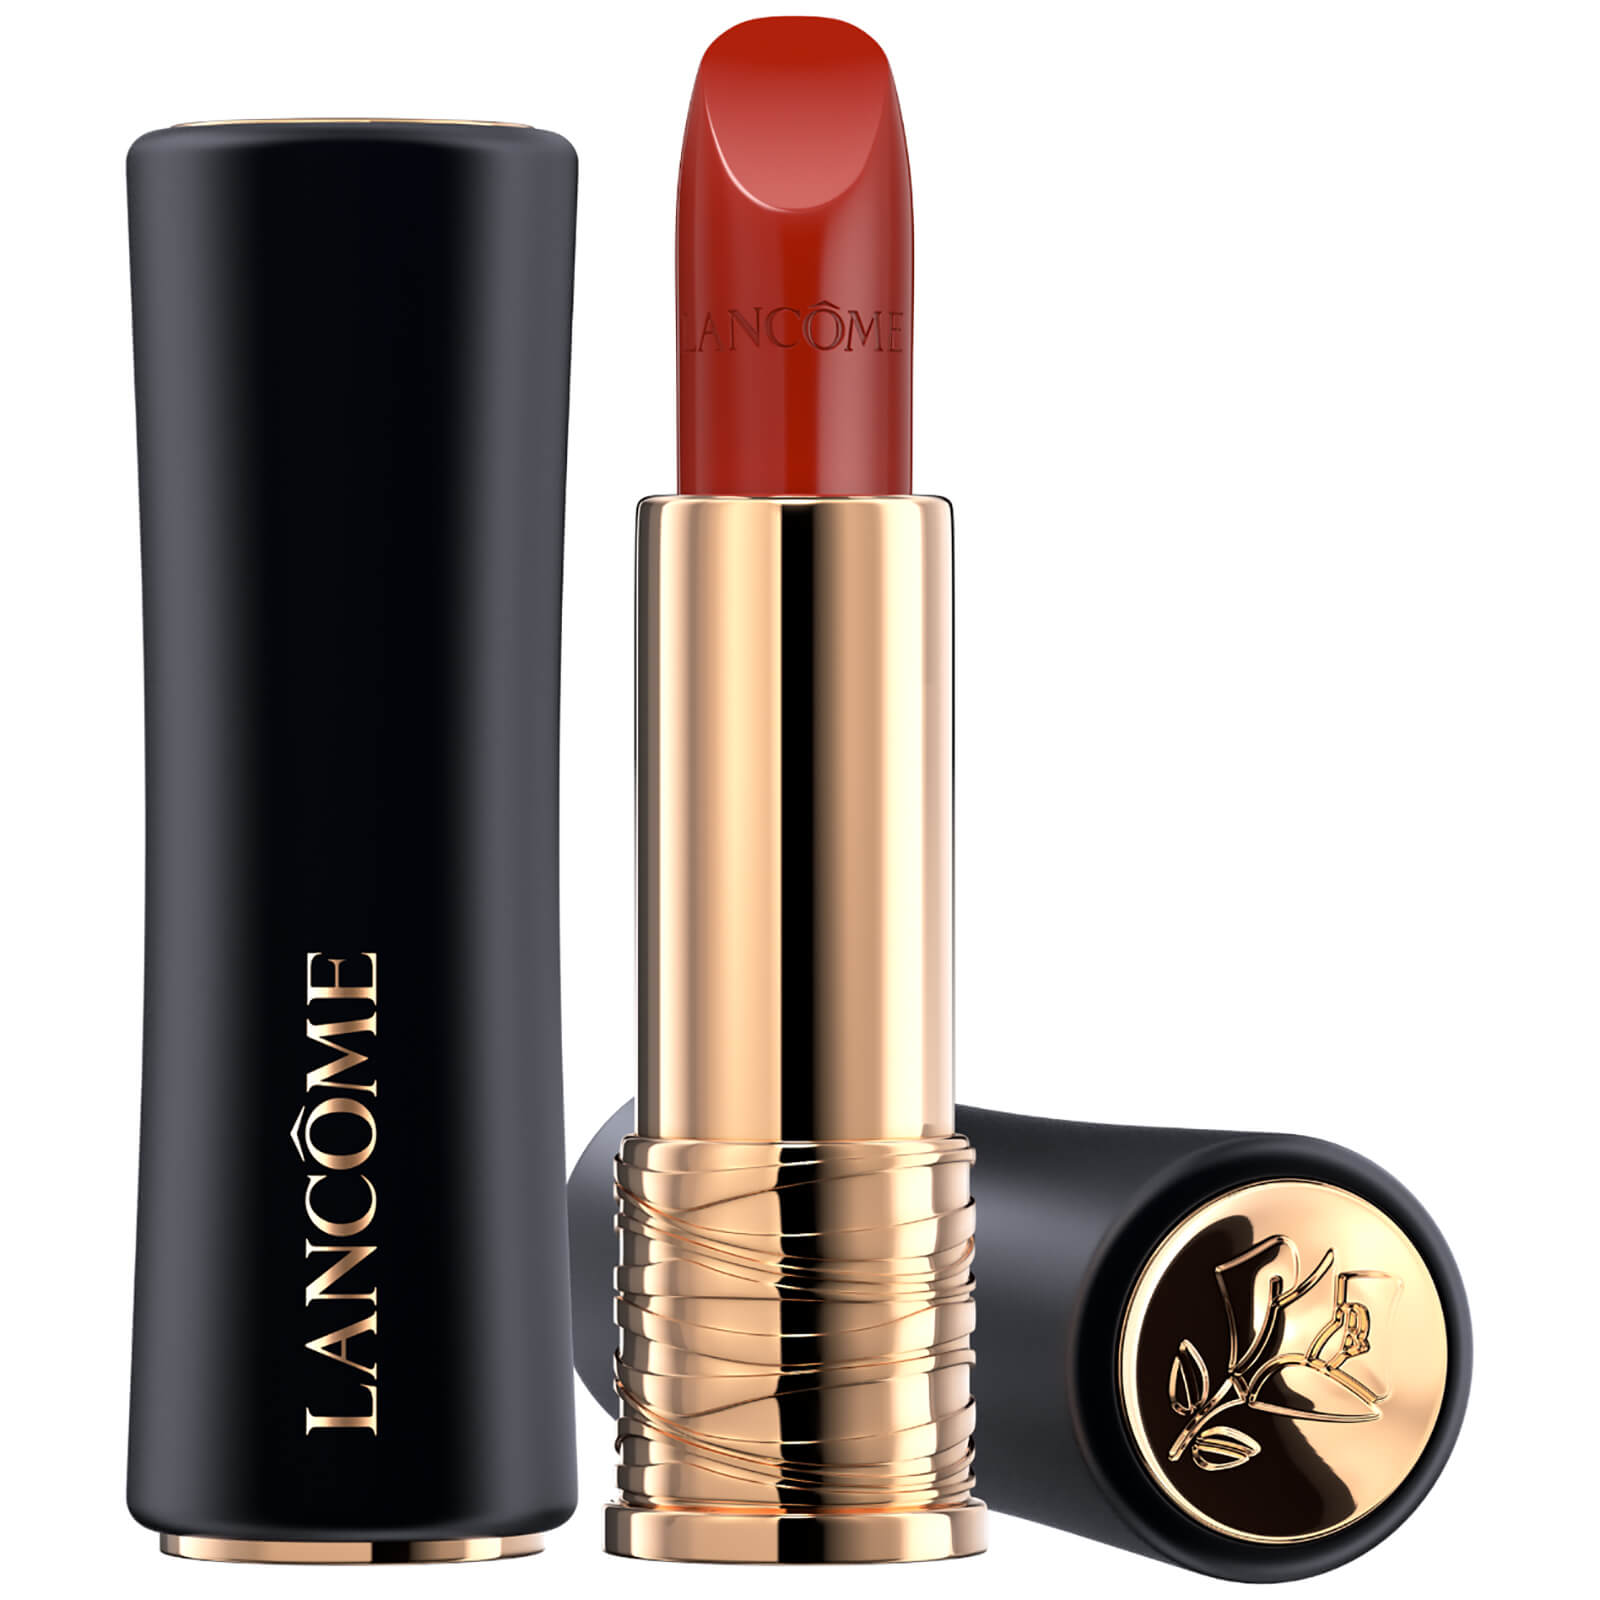 Lancome L'Absolu Rouge Cream Lipstick 35ml (Various Shades) - 196 French Touch